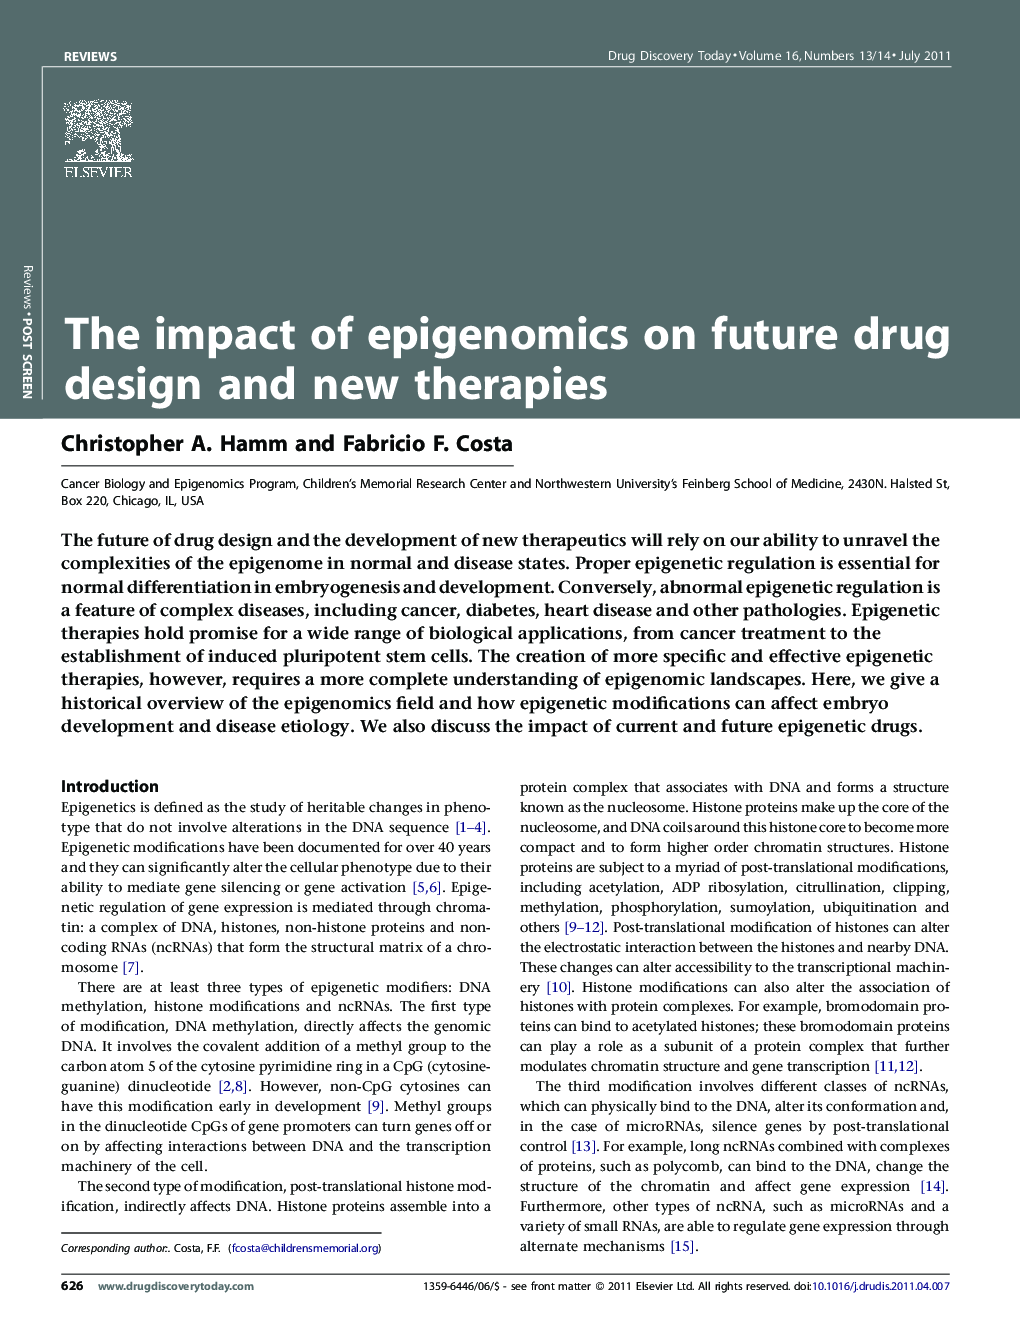 The impact of epigenomics on future drug design and new therapies